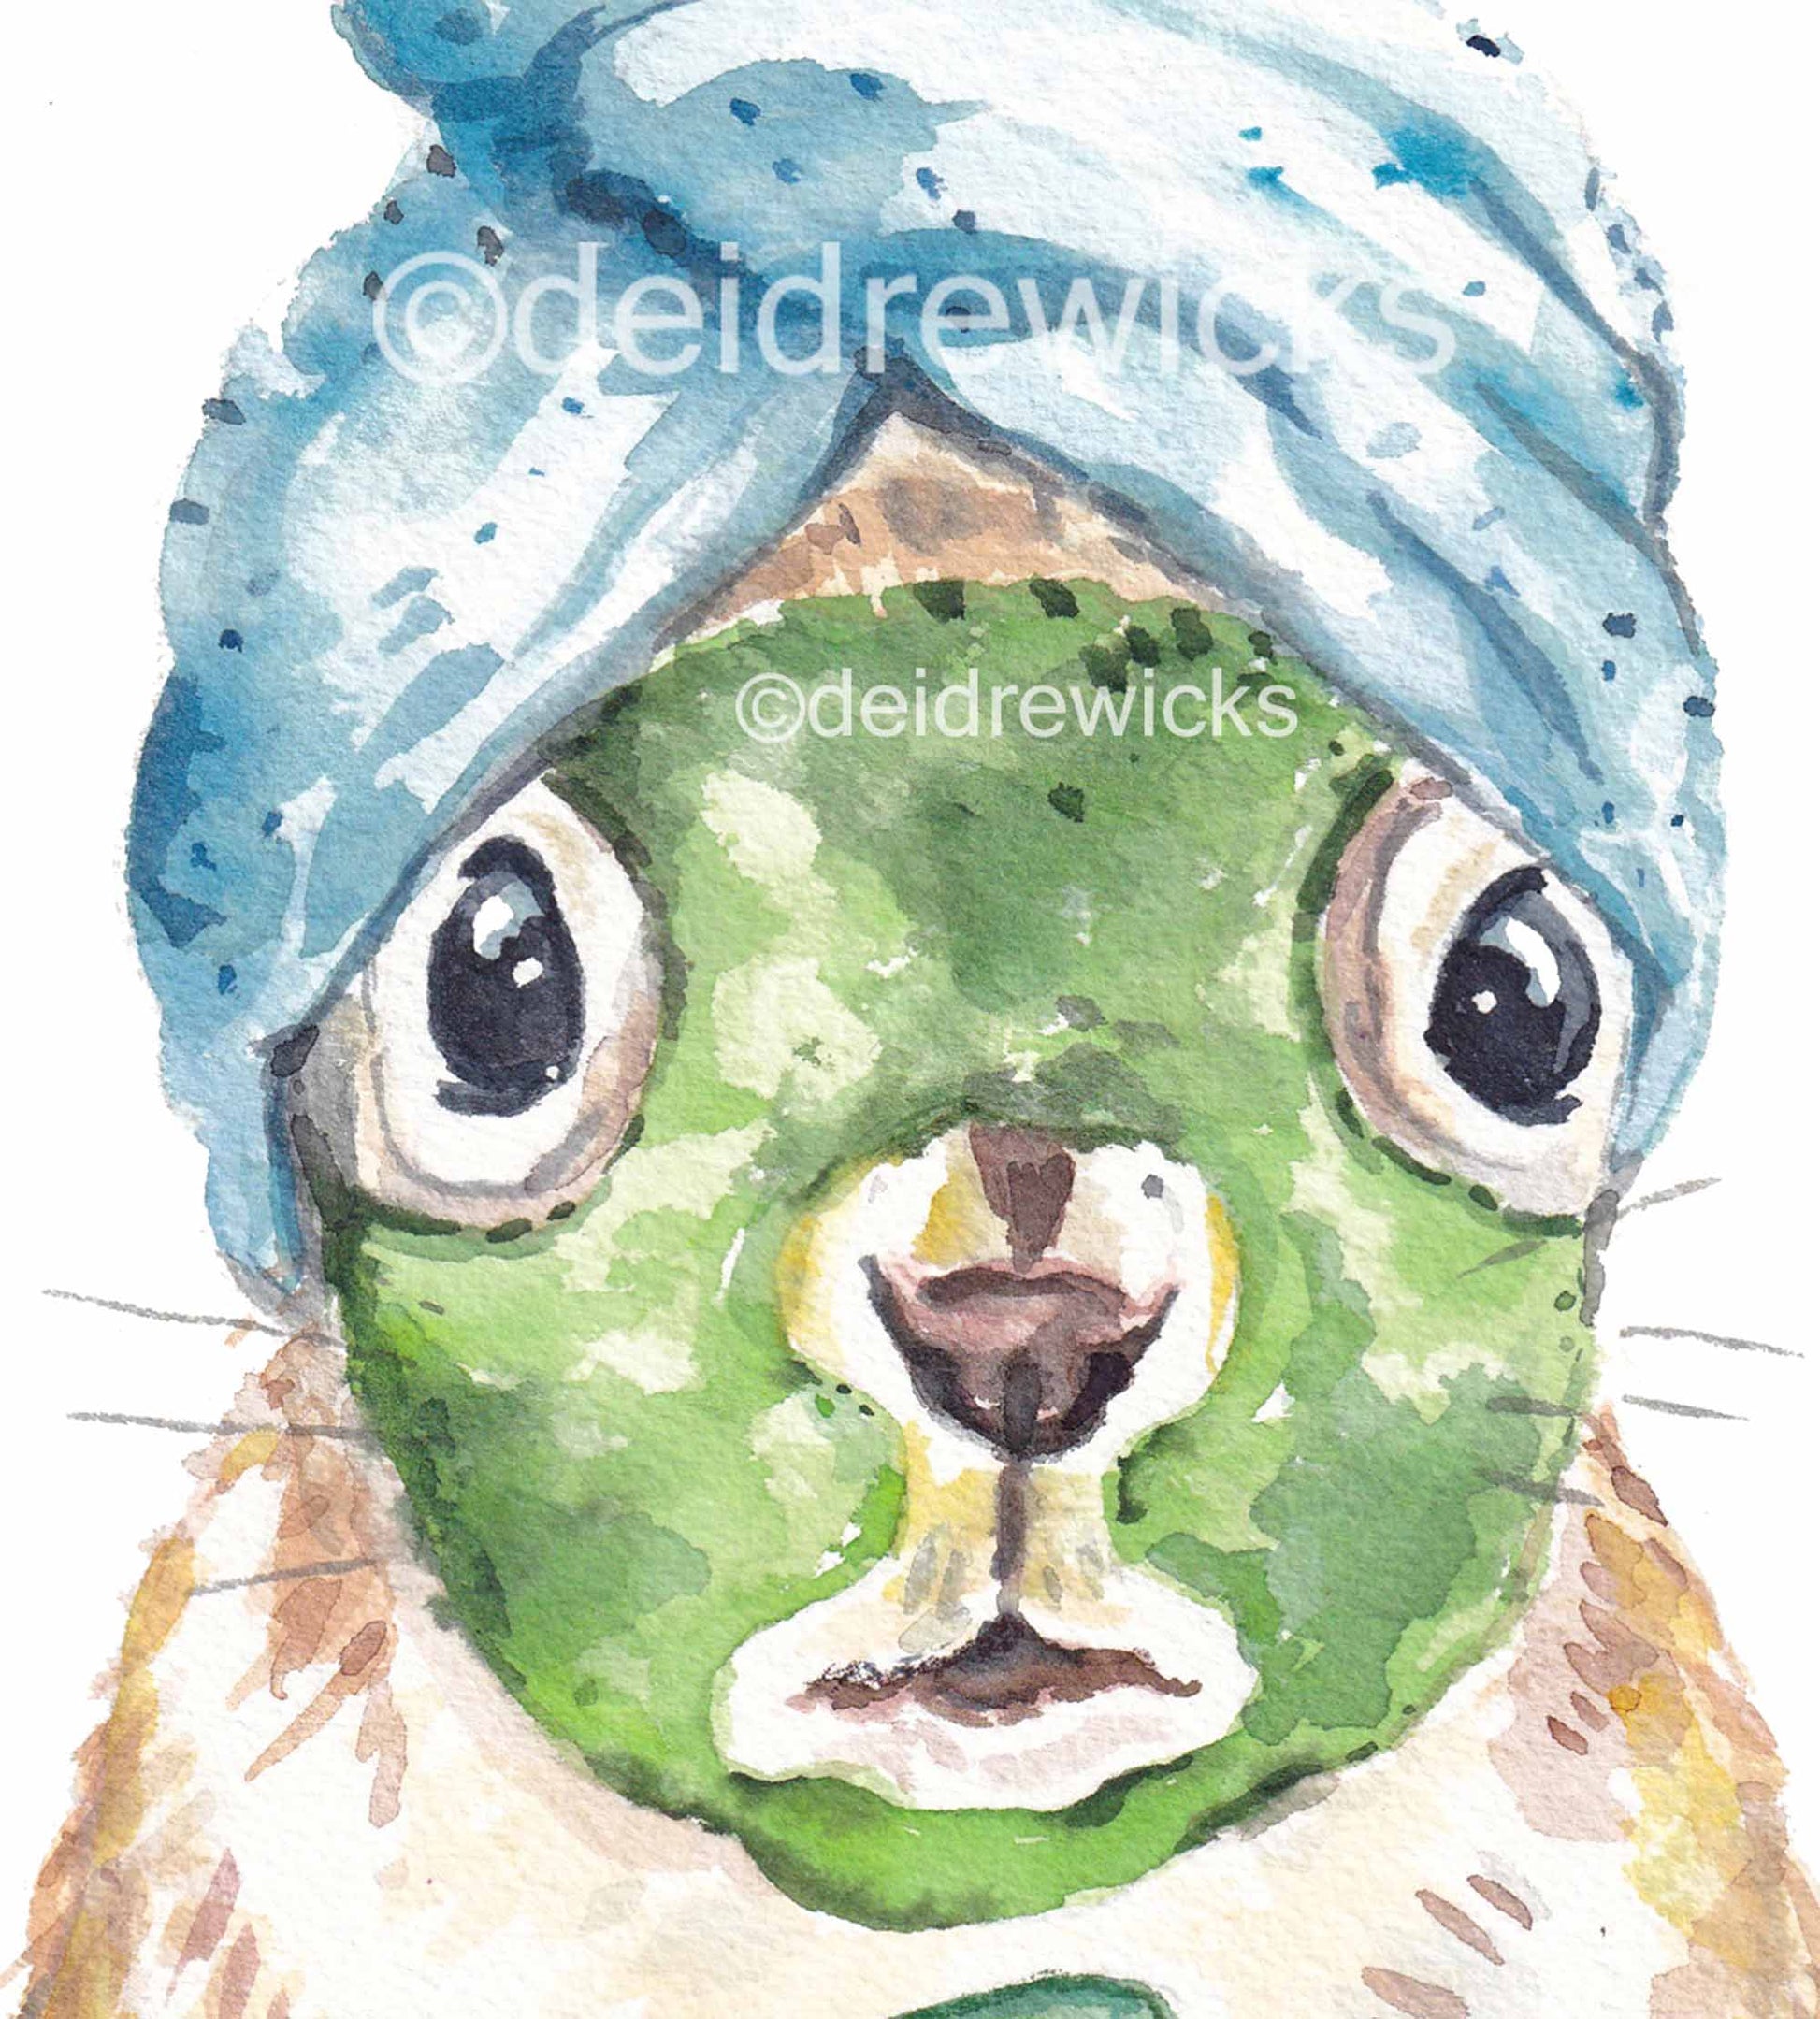 Close up of a watercolour painting of a squirrel wearing a clay face mask. Everyone needs some down time, even squirrels.